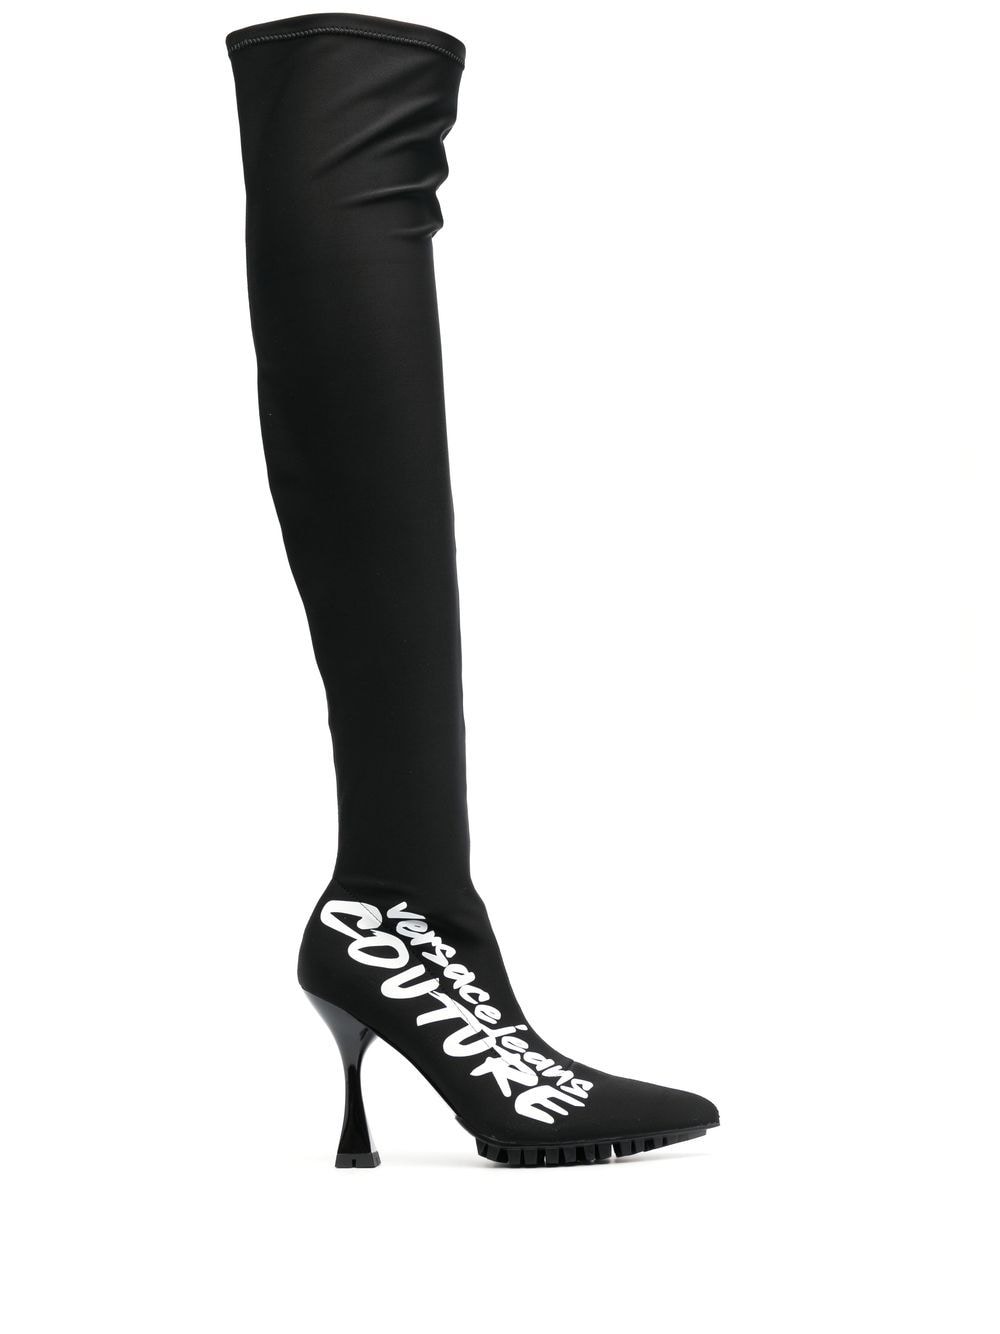 VERSACE JEANS COUTURE FLAIR LOGO THIGH-HIGH BOOTS